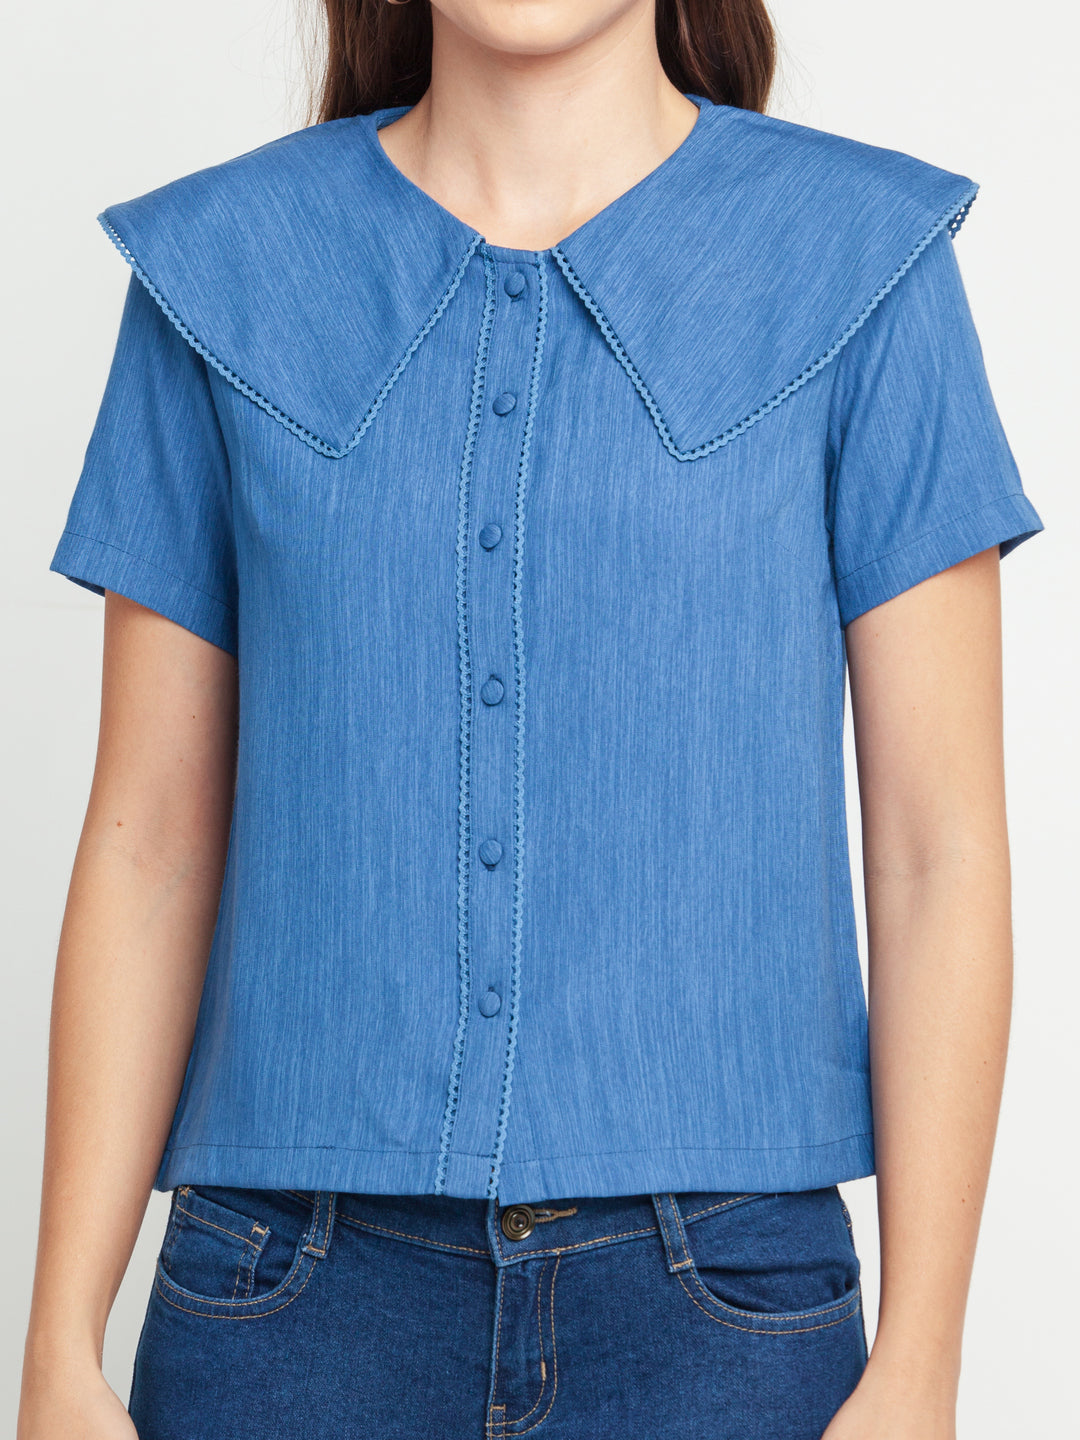 Blue Solid Lace Insert Shirt For Women